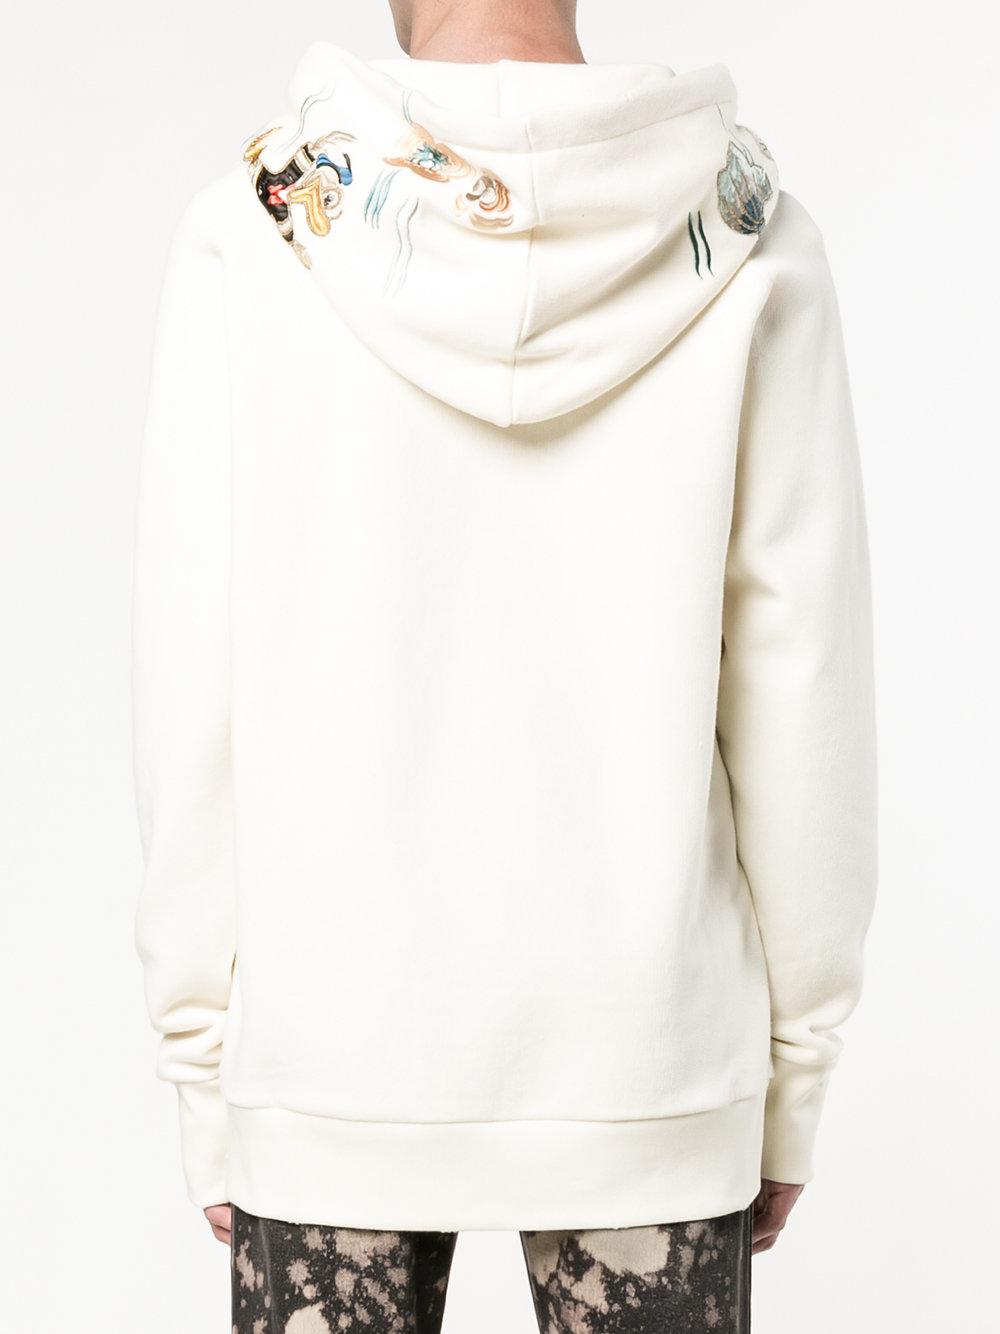 Gucci Cotton Blind For Love Embroidered Hoodie in White for Men - Lyst